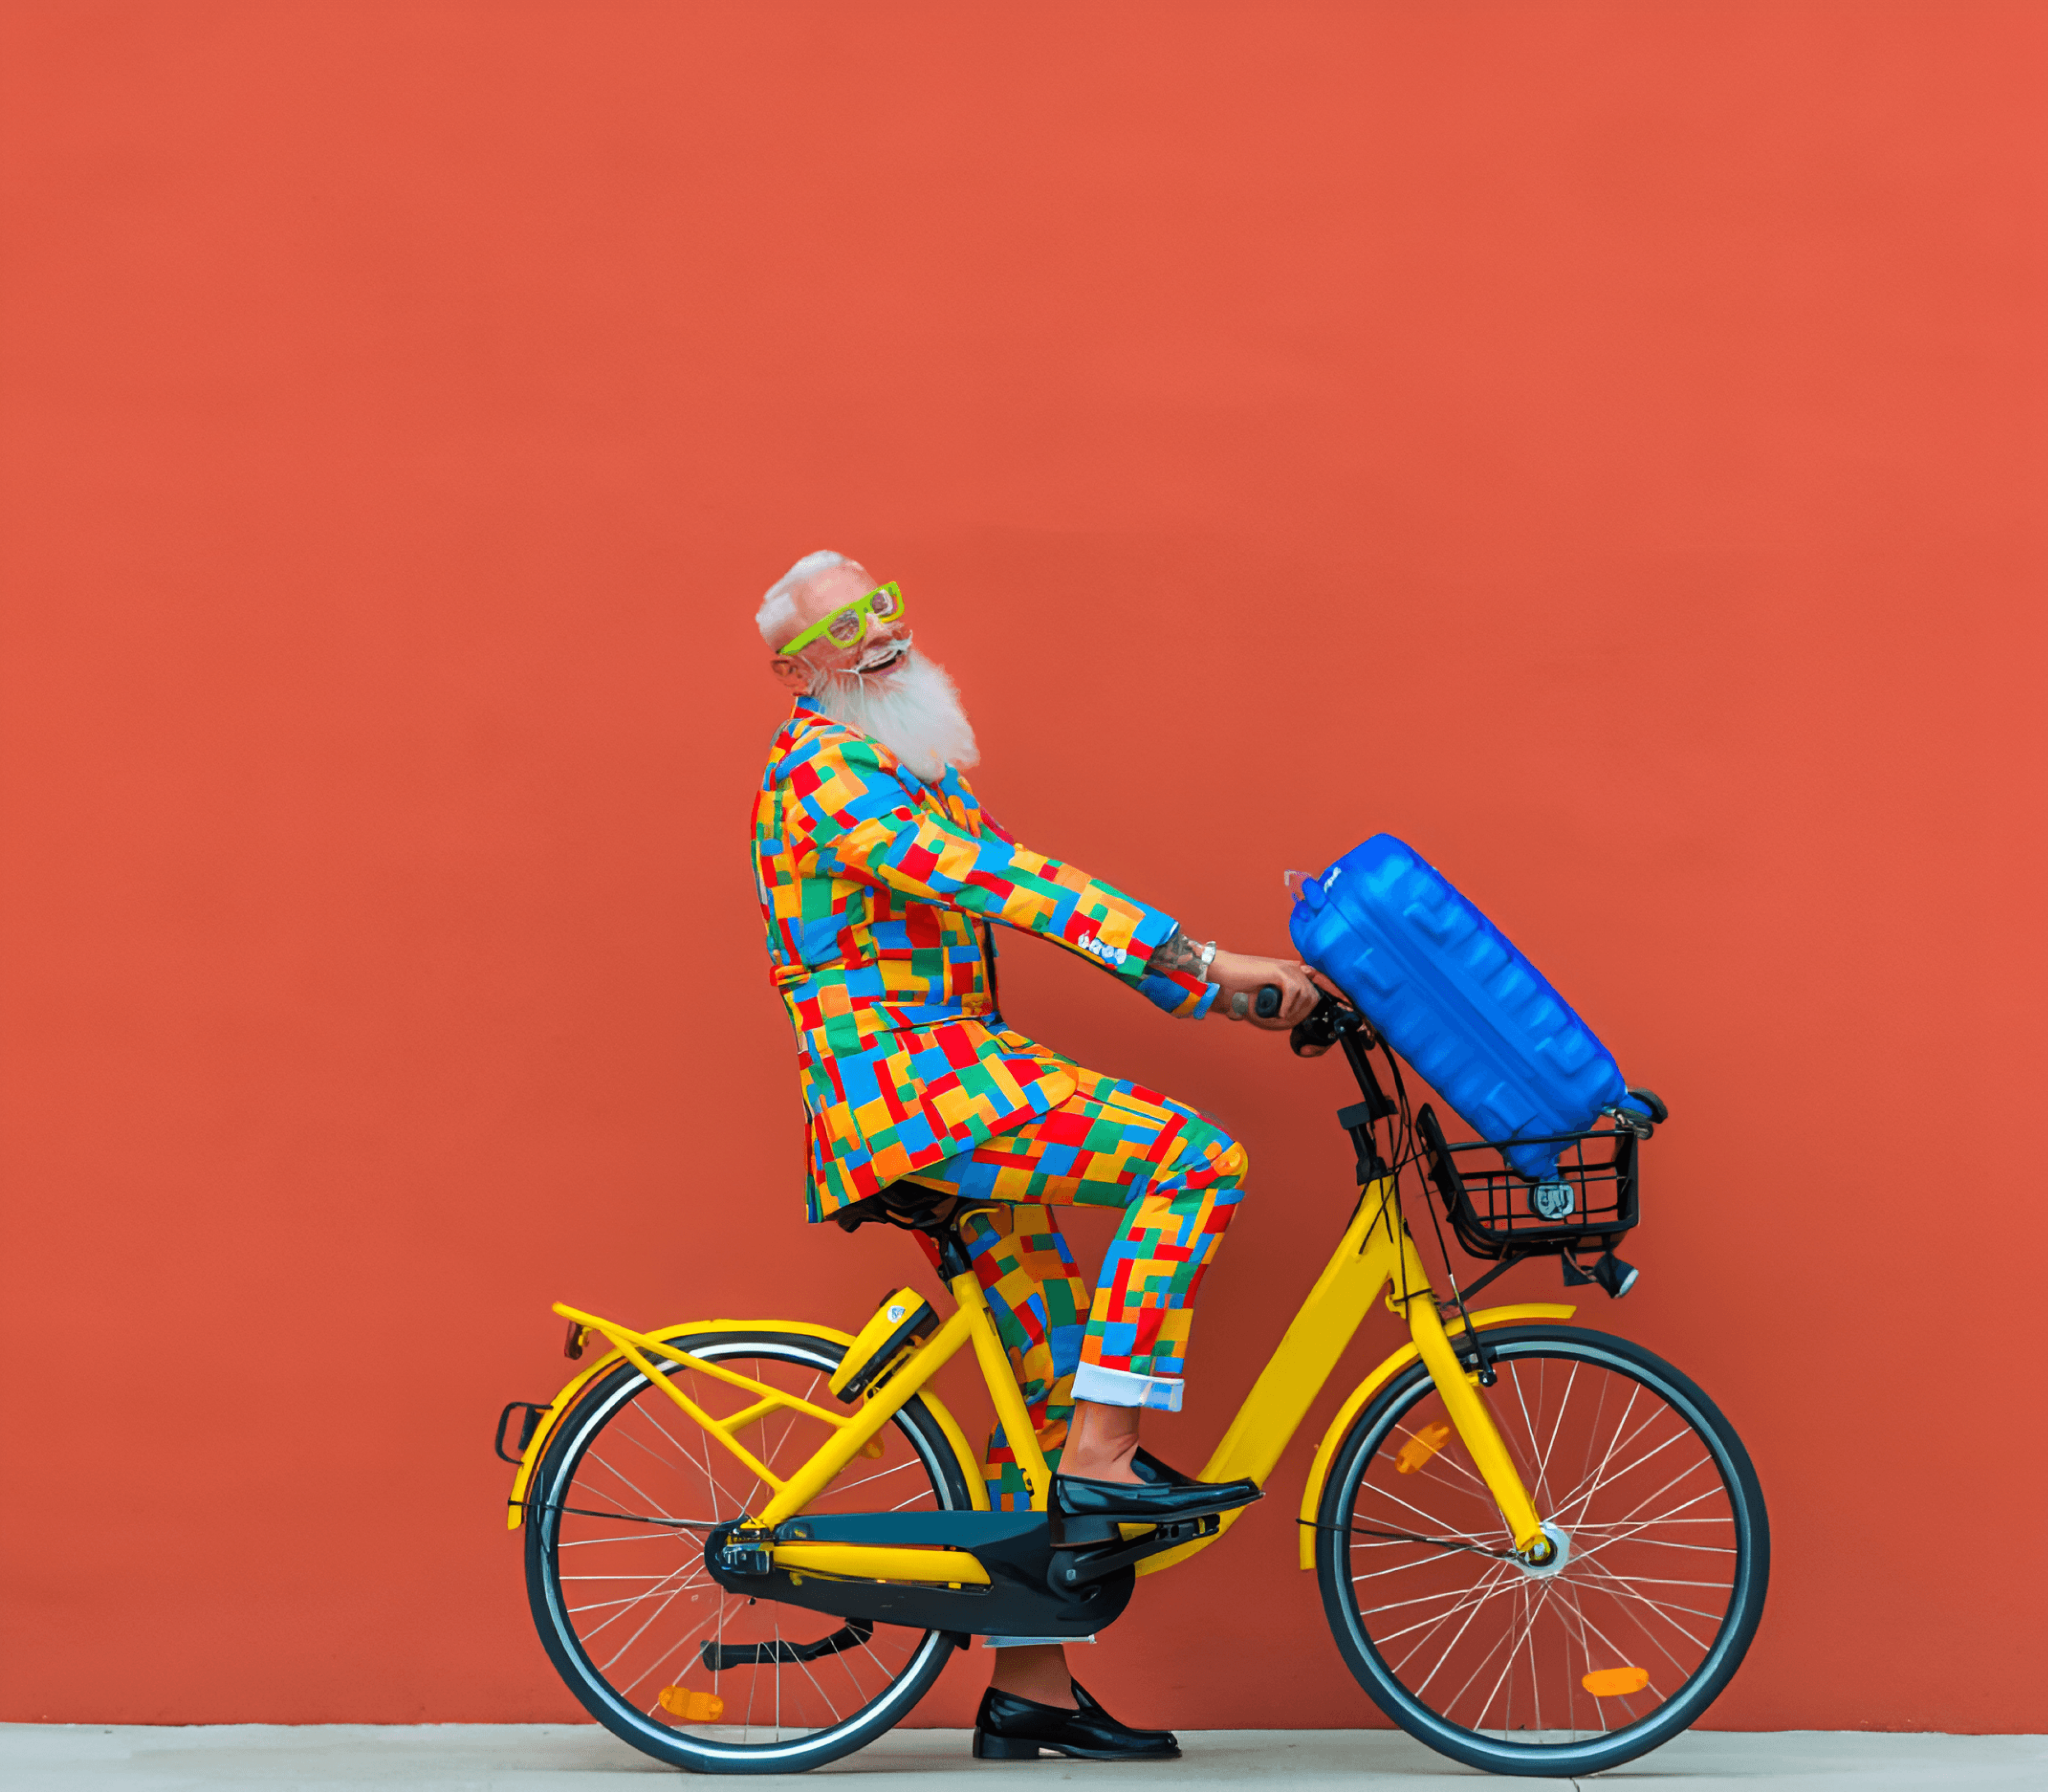 Man with large grey beard riding a yellow bicycle carrying a suitcase in the basket, laughing.